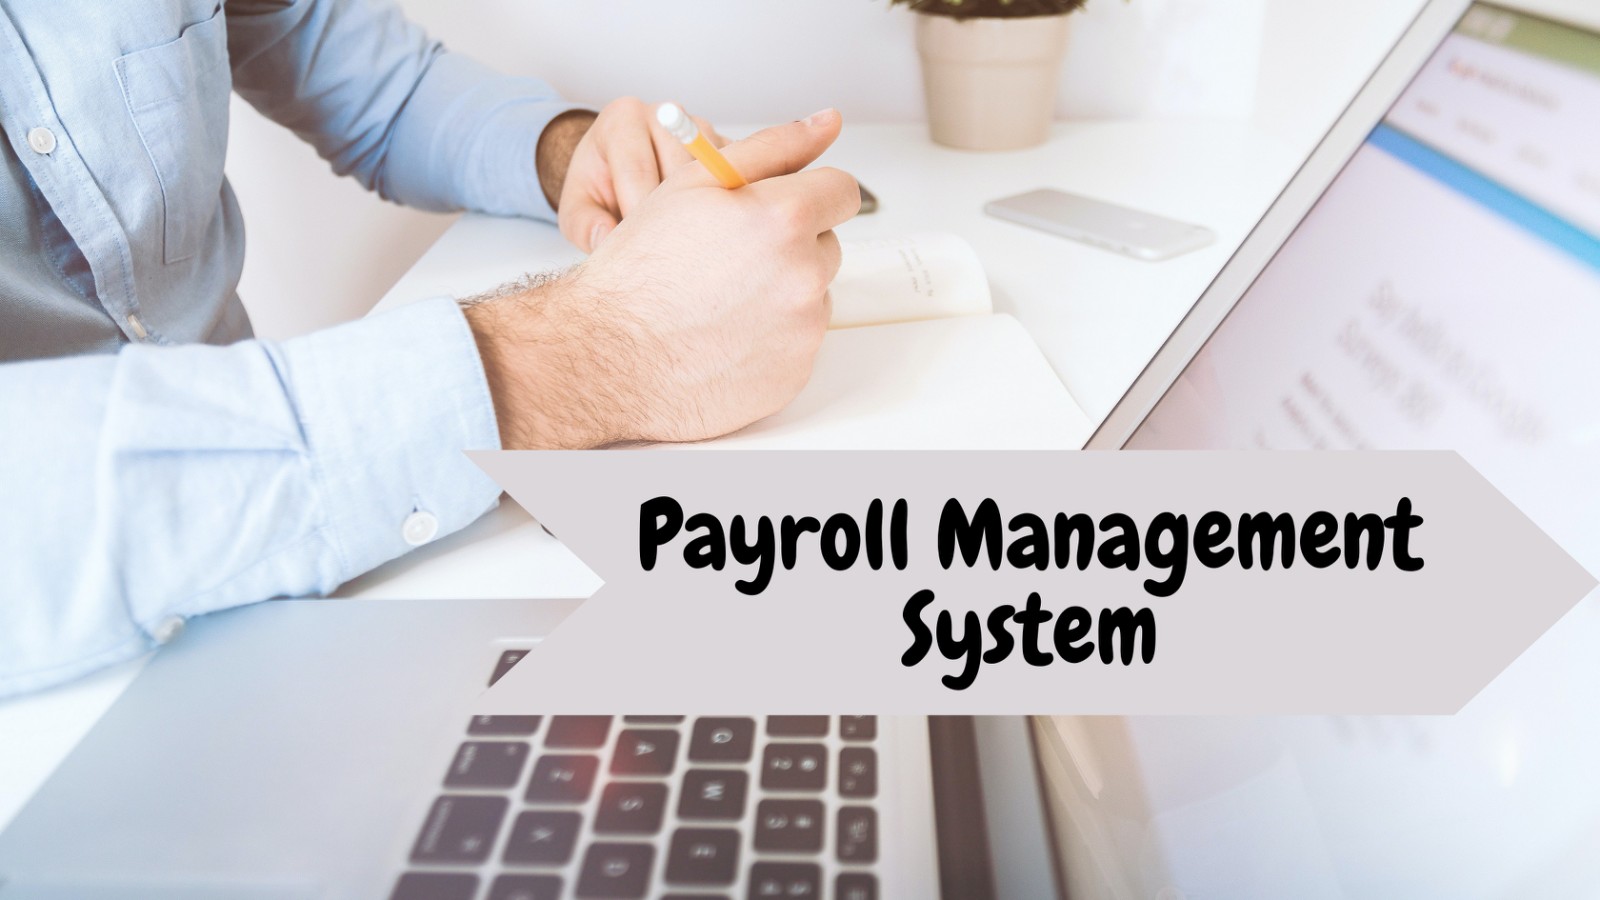 What is a Payroll Management System?